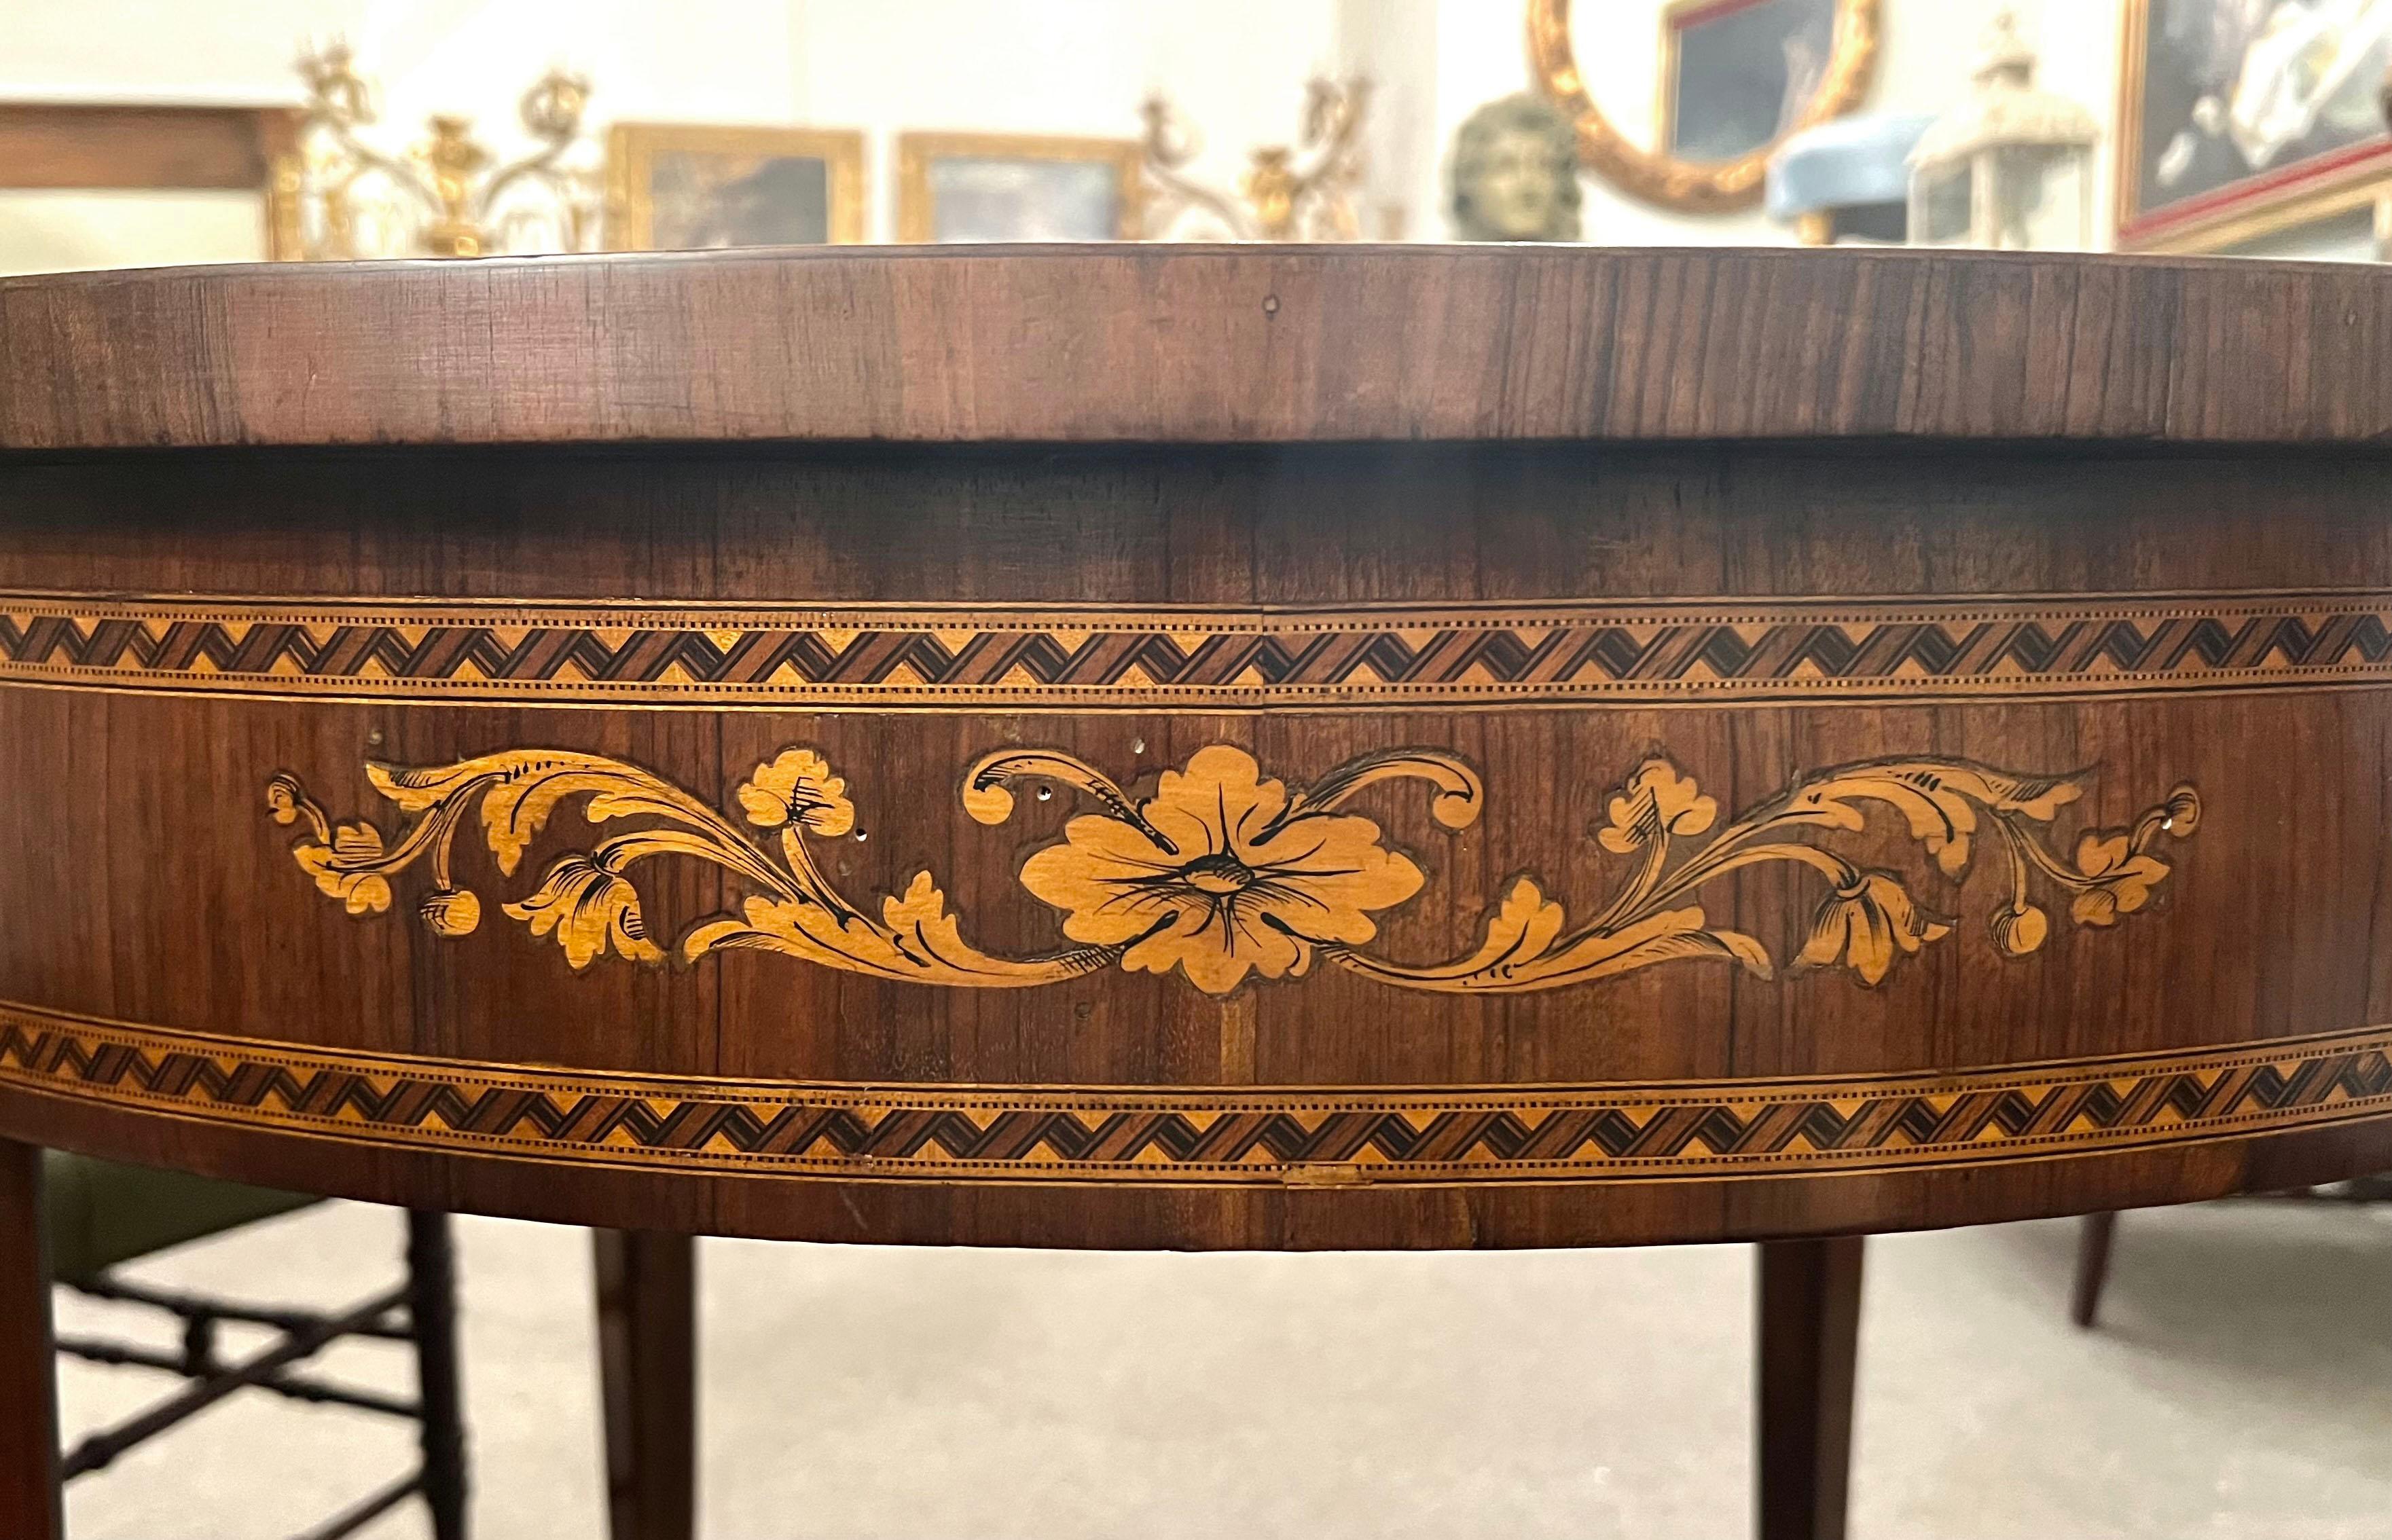 Elegant circular coffee table entirely veneered in walnut and finely inlaid with floral and vegetal motifs in fruit wood. The inlays decorate the top, the band and the legs of the coffee table in a refined way, with details such as framed bands,